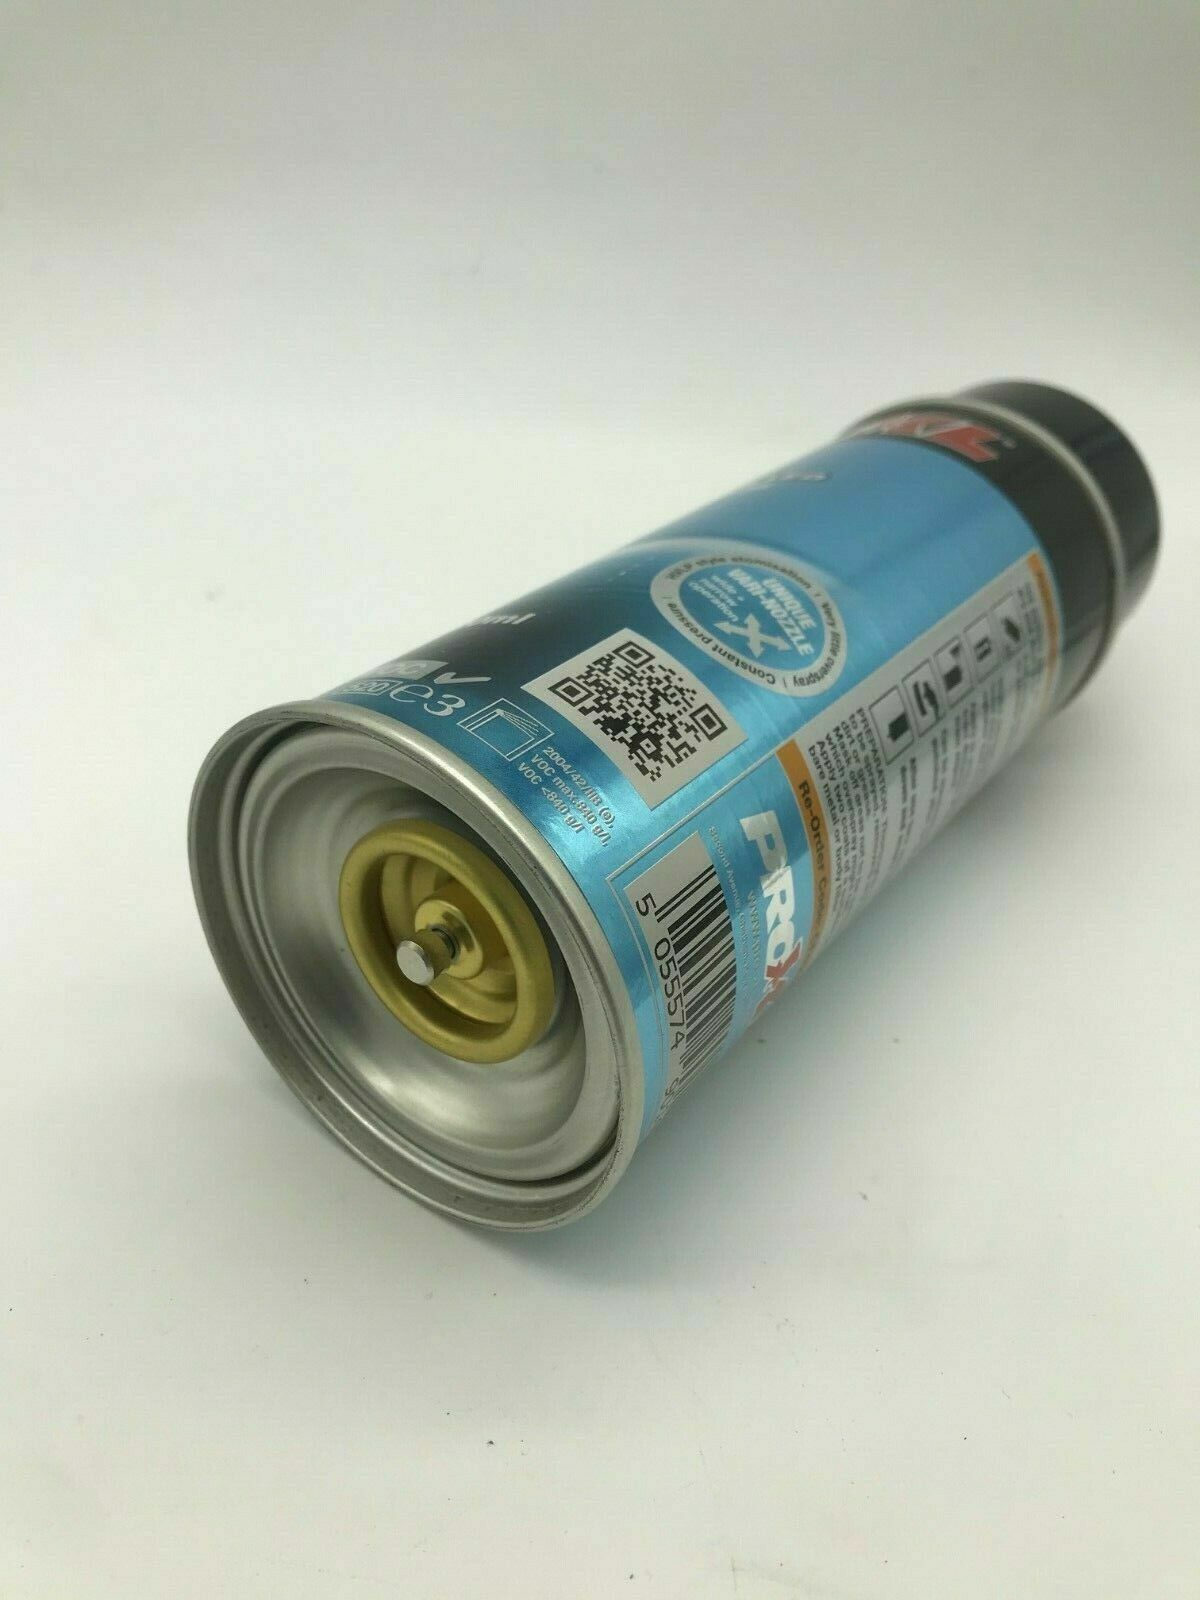 2k Activated HS High Gloss Clear Aerosol Paint